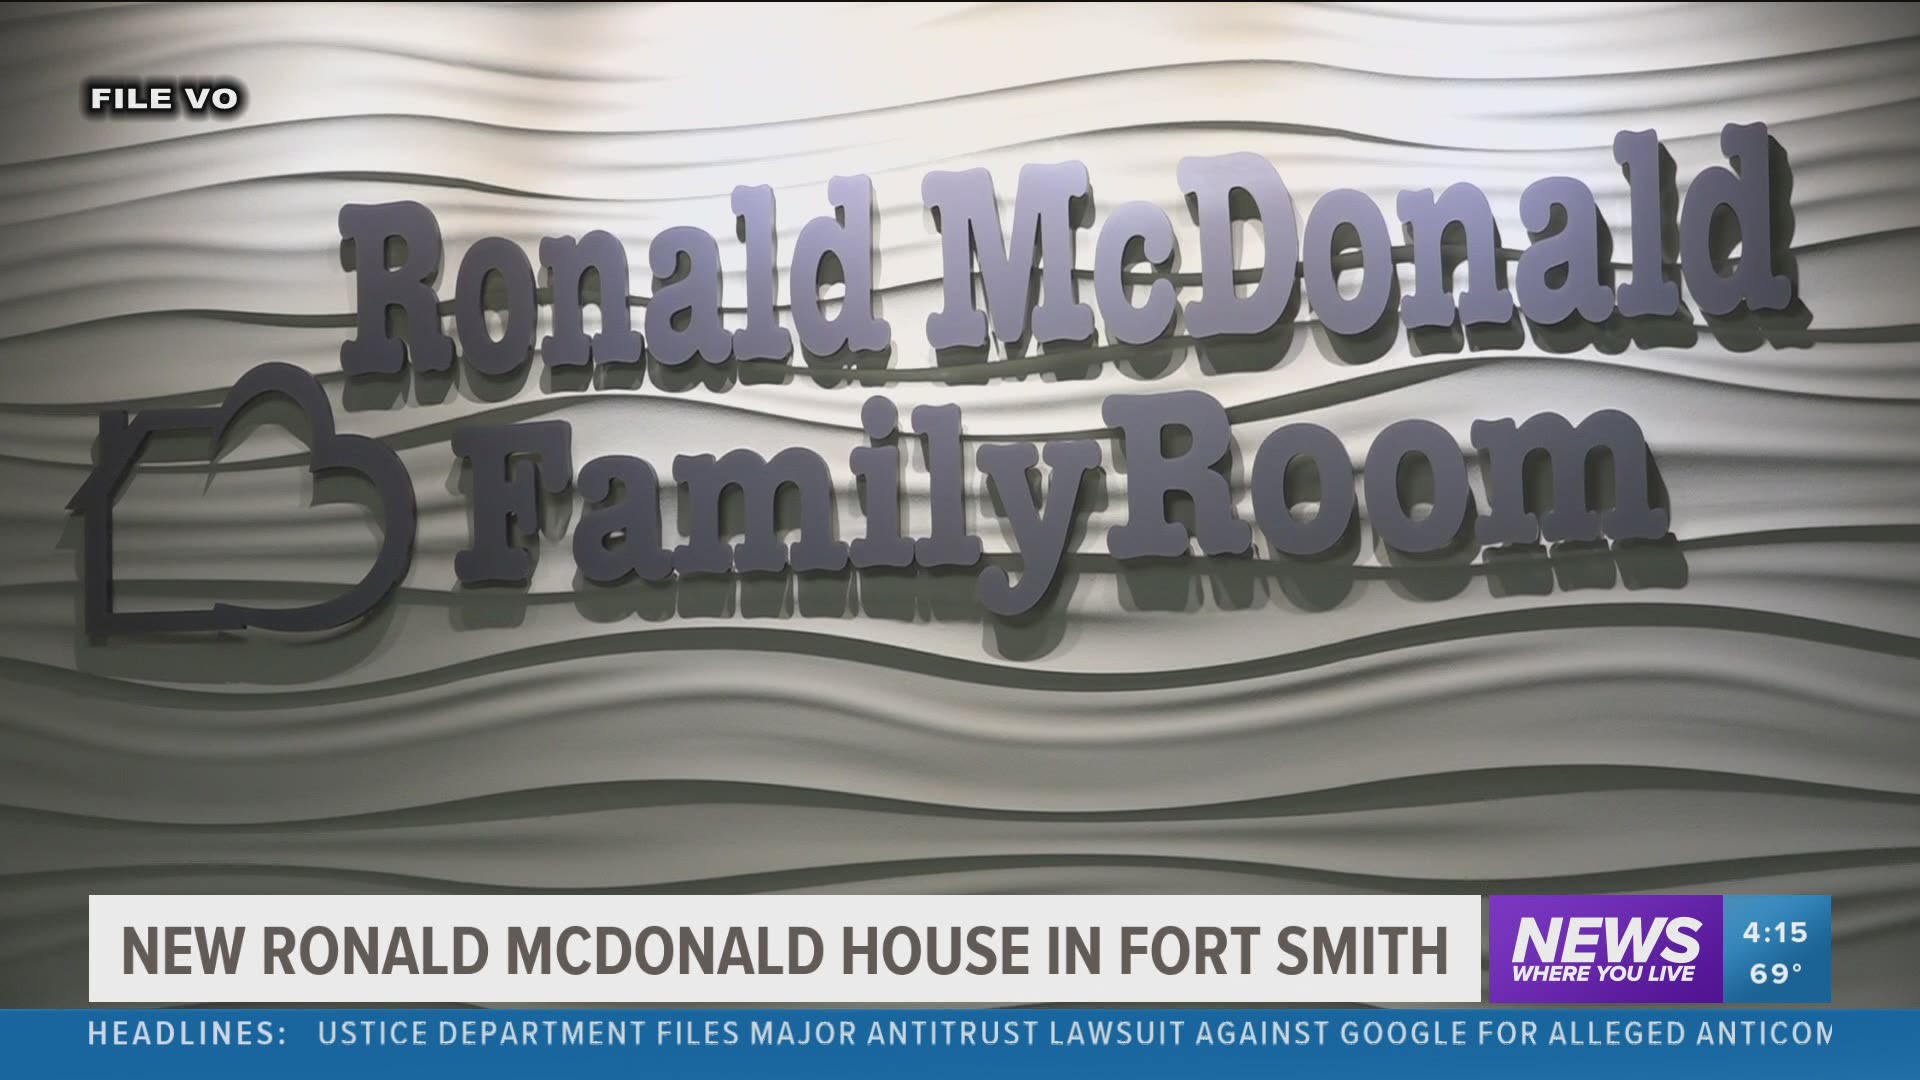 An anonymous donation is helping relieve stress for River Valley families with sick children. A new Ronald McDonald House will be built with the funds.